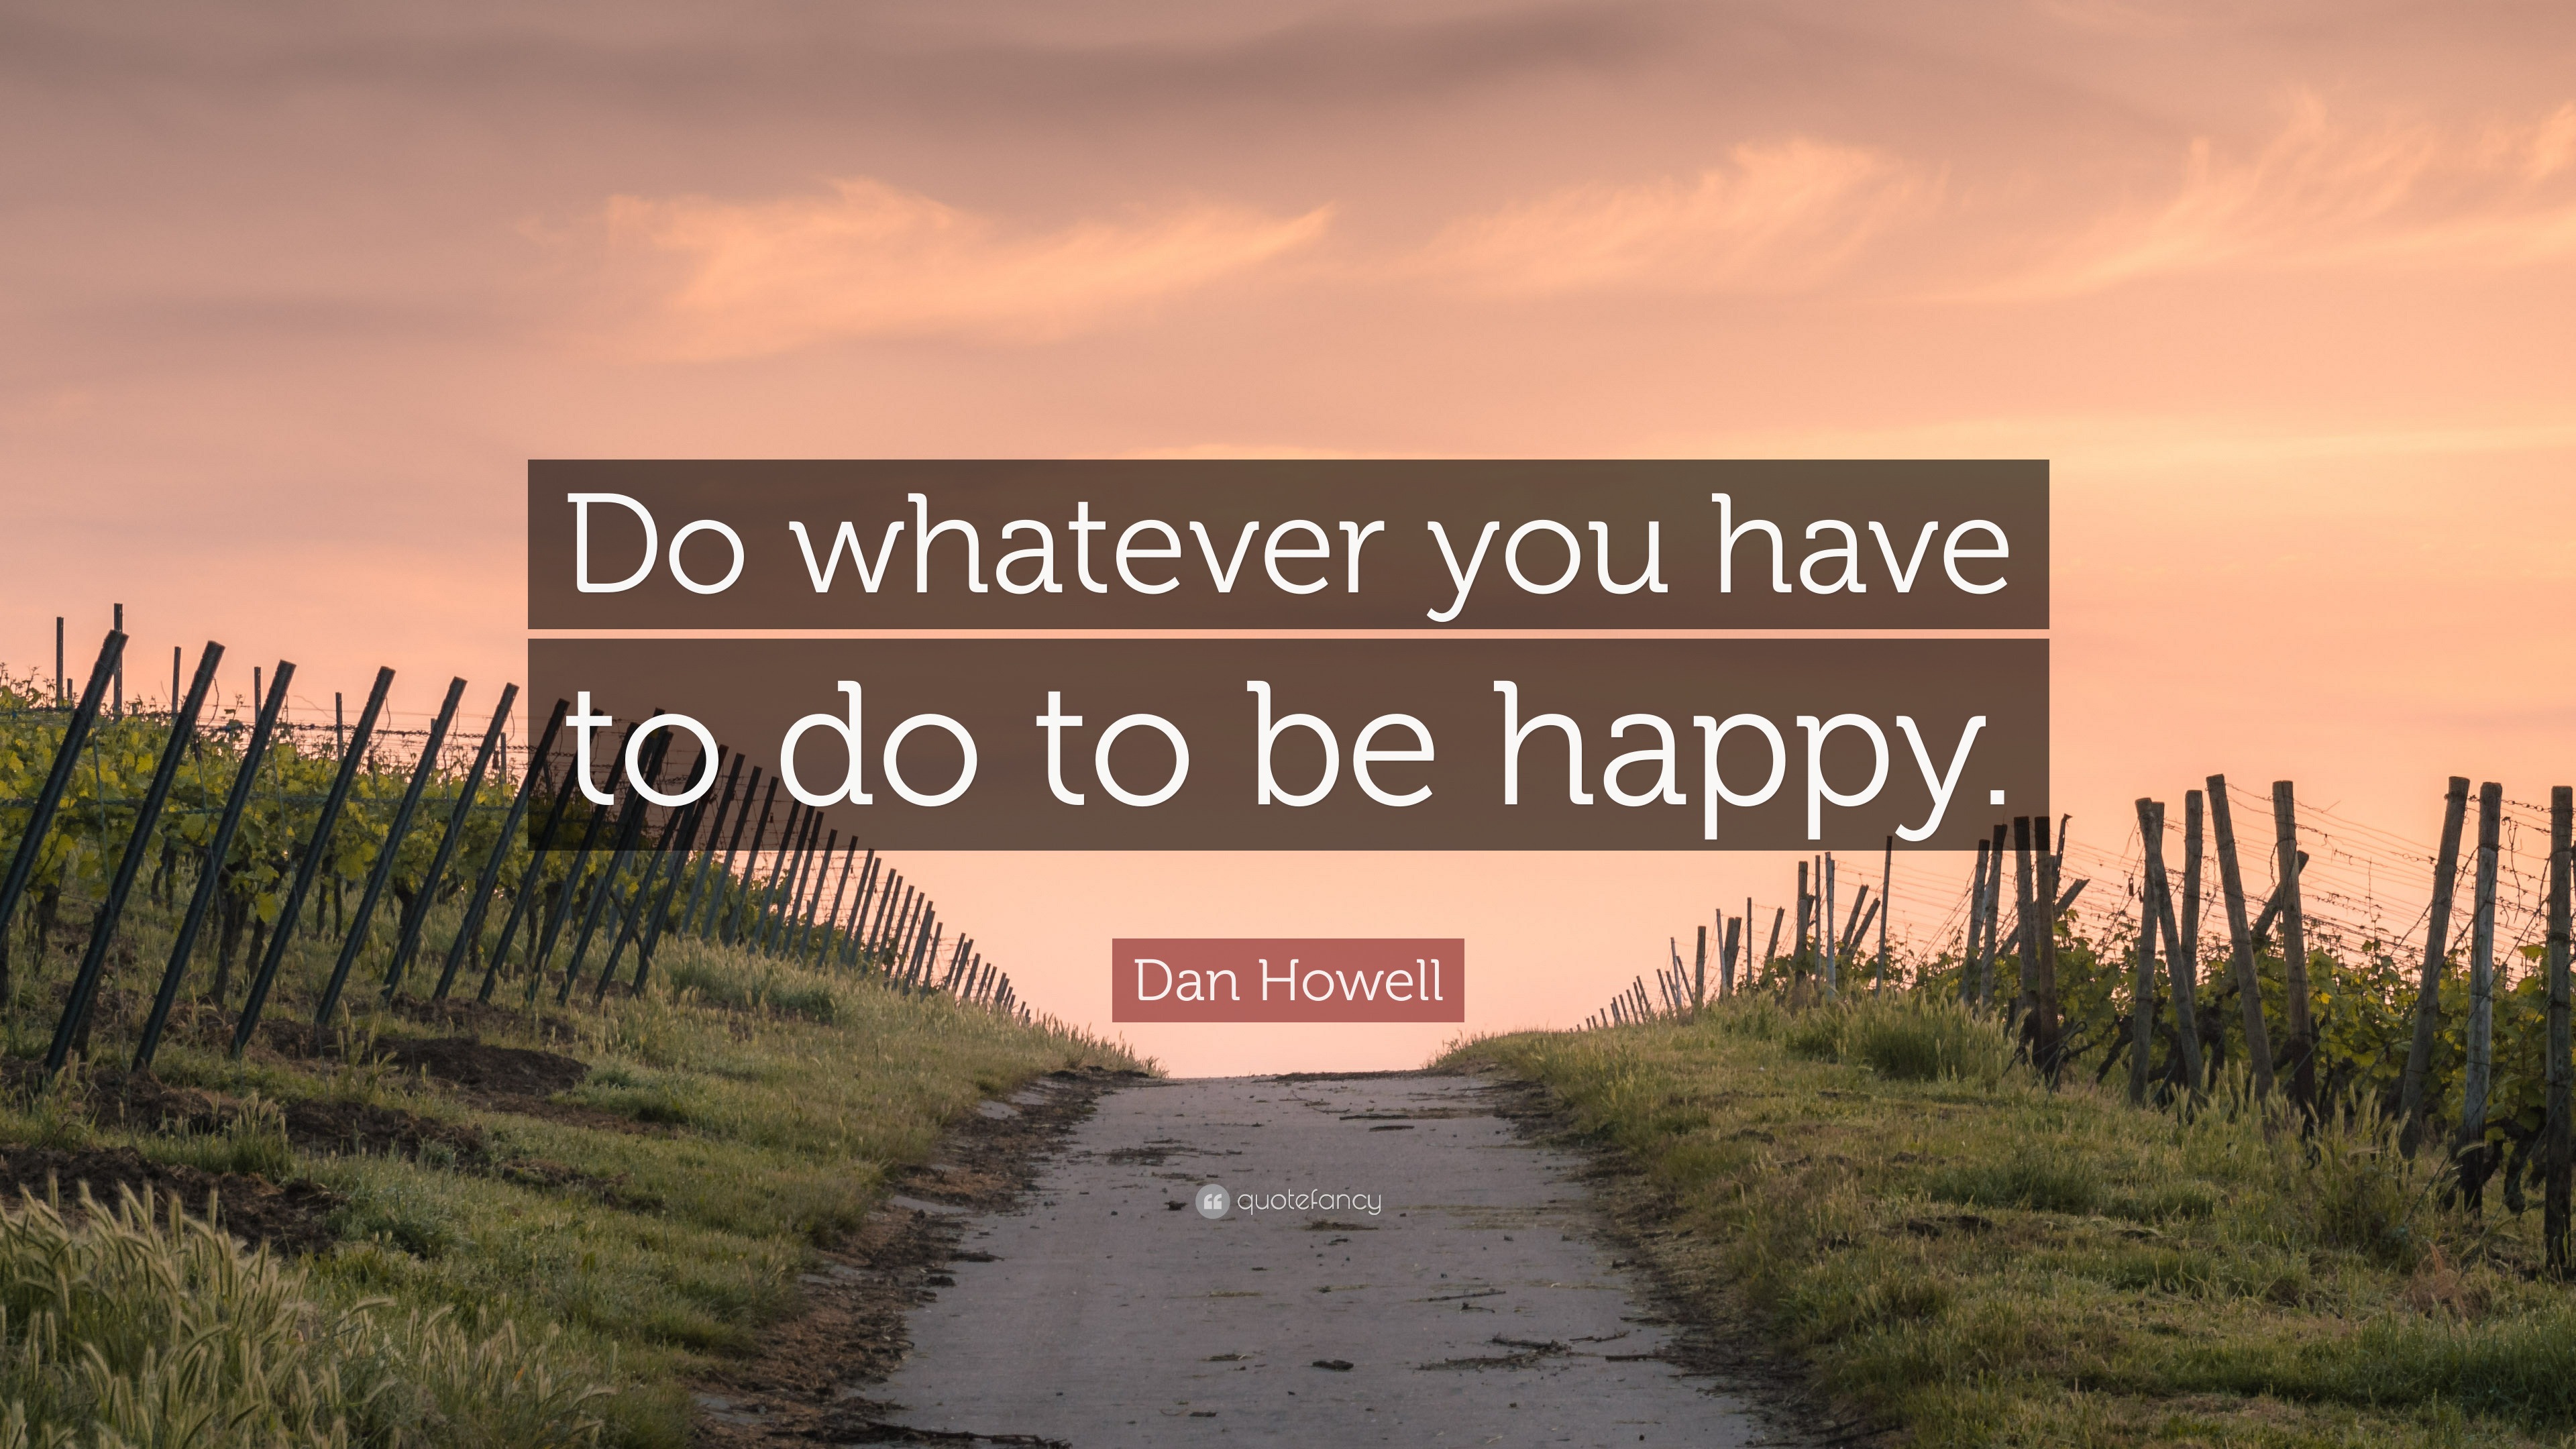 Dan Howell Quote: “Do whatever you have to do to be happy.”